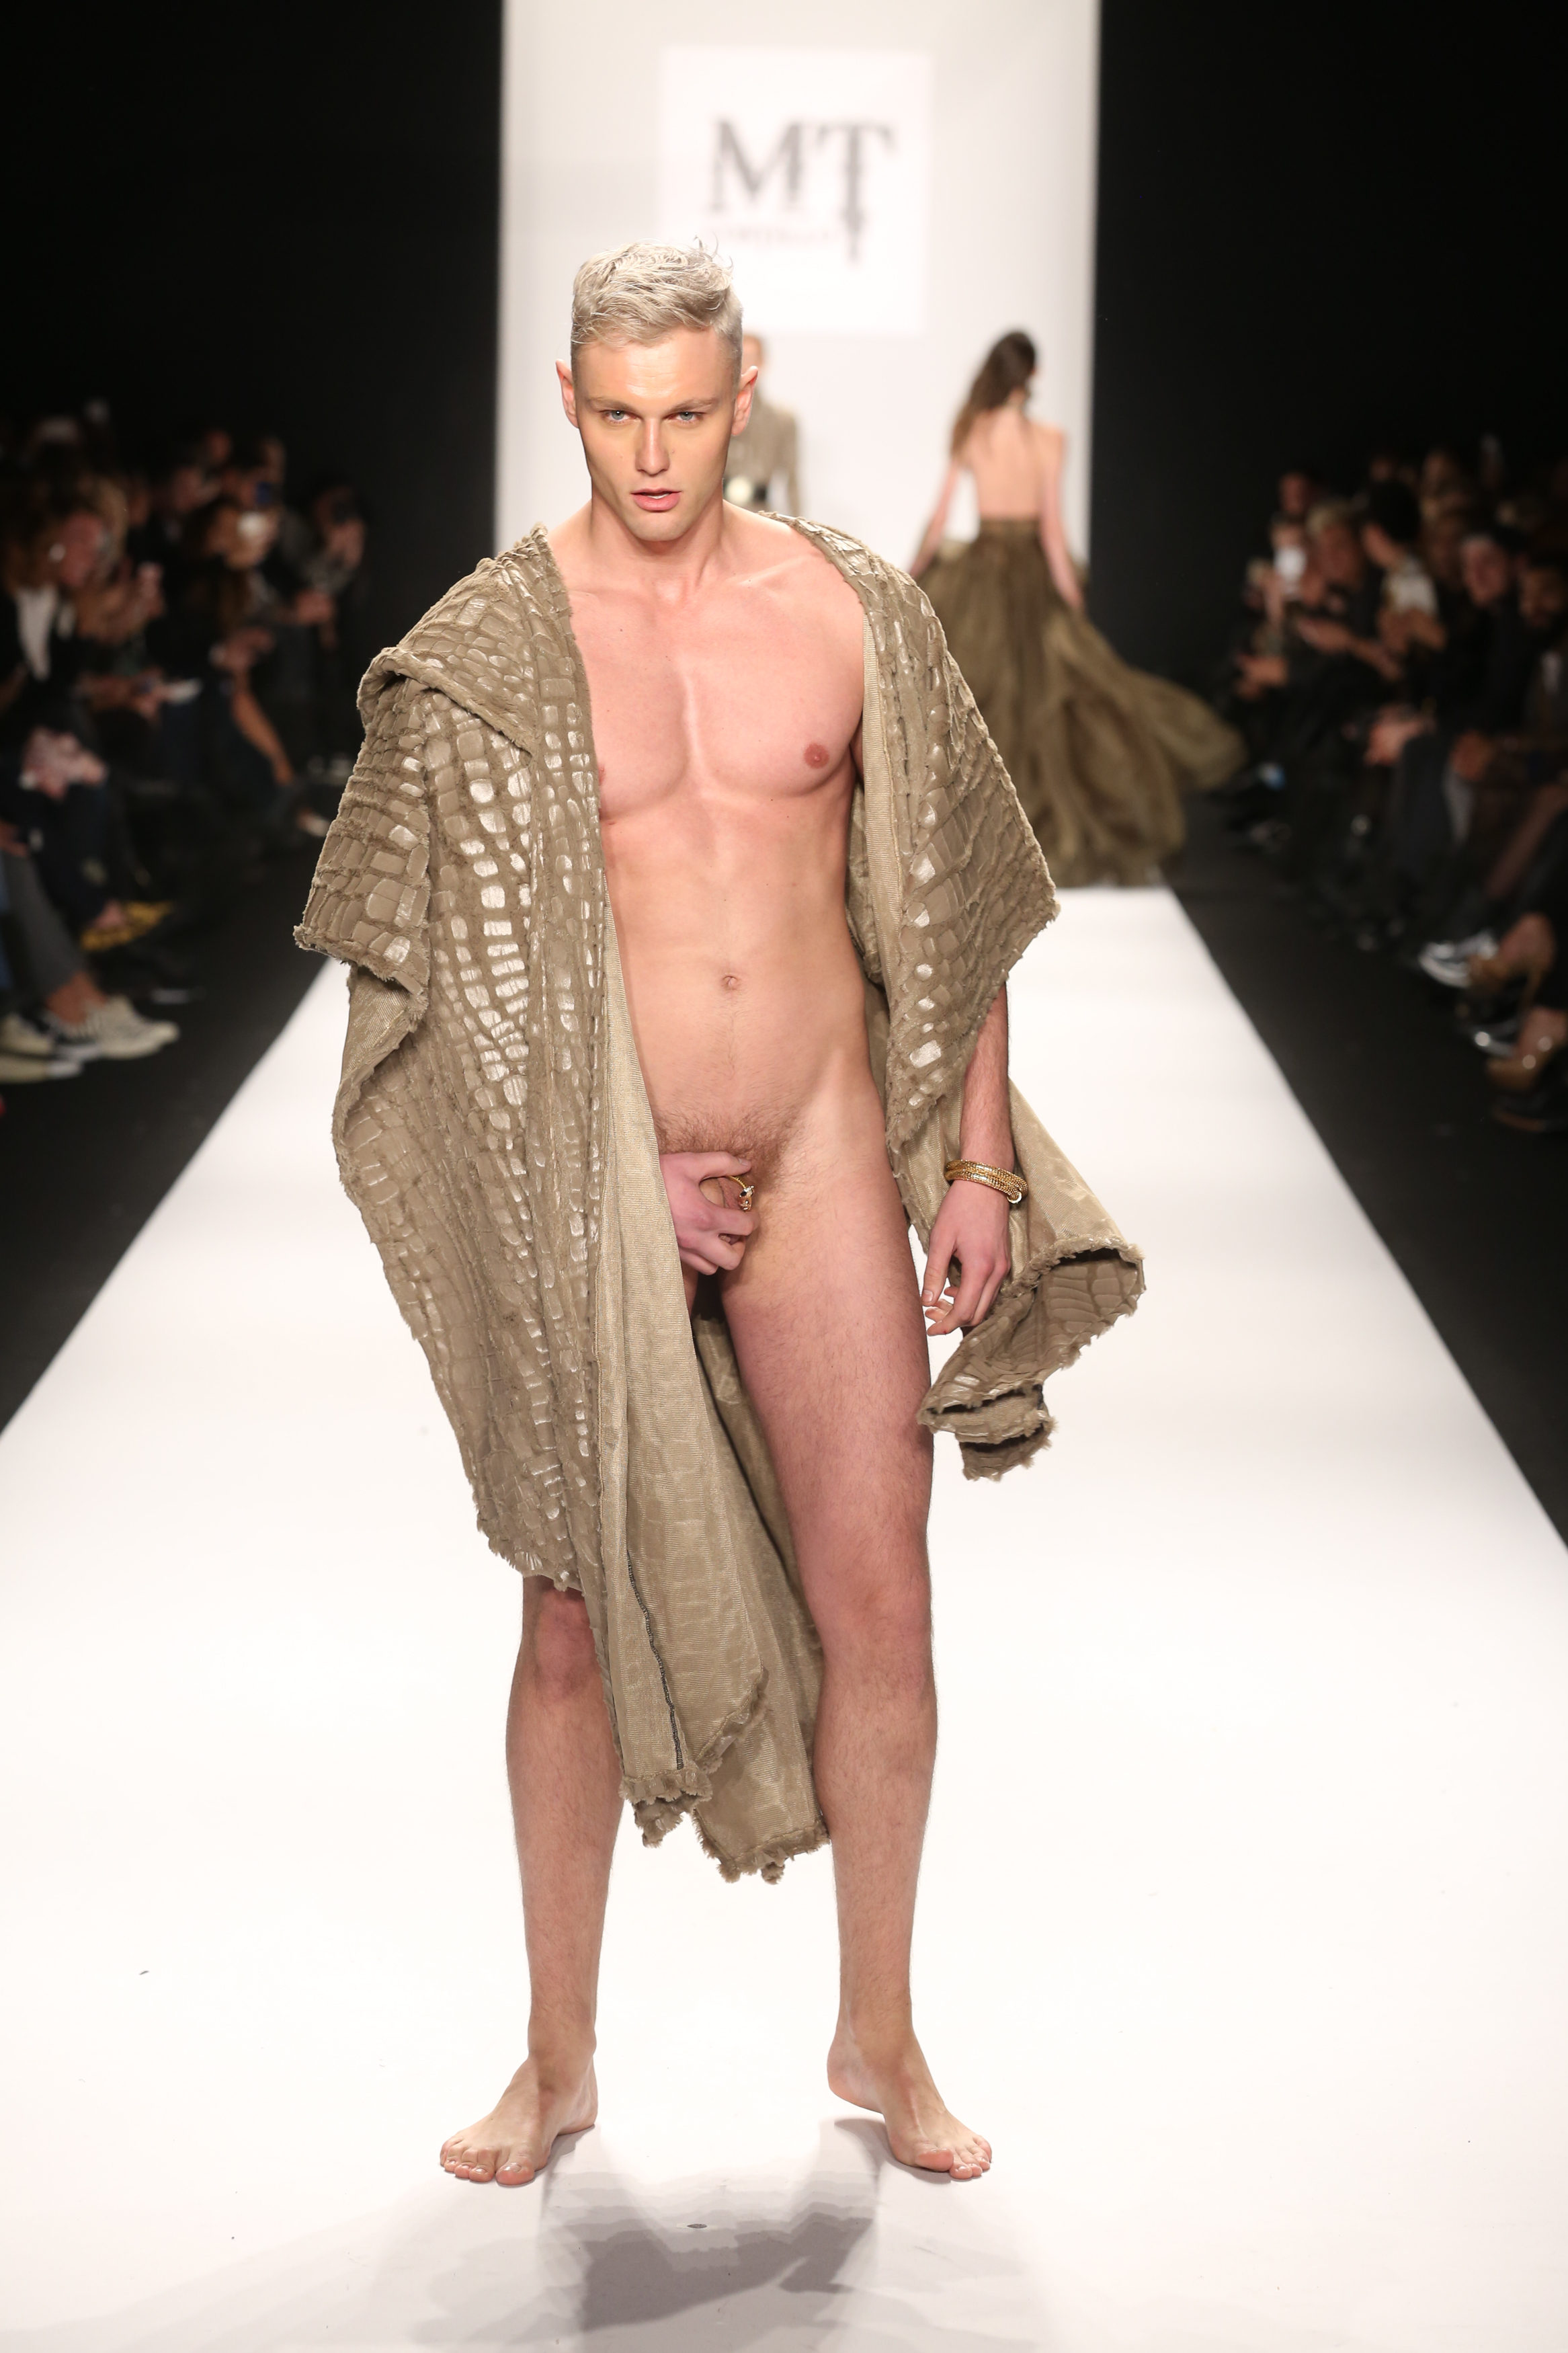 Nude Male Model Causes Controversy With Fashion Week Orchestrators